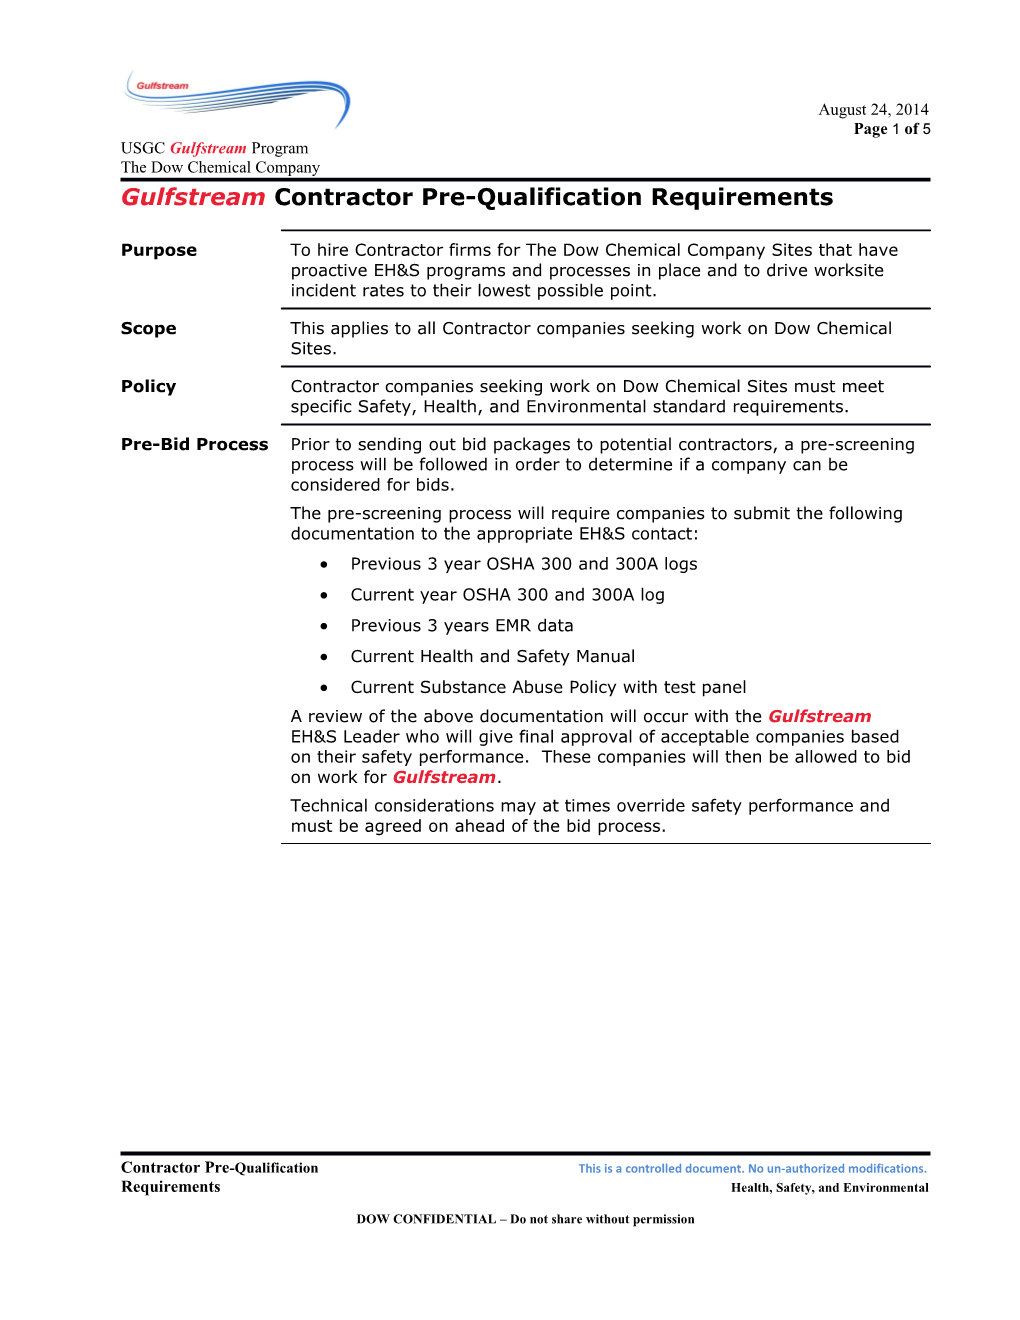 Gulfstreamcontractor Pre-Qualification Requirements